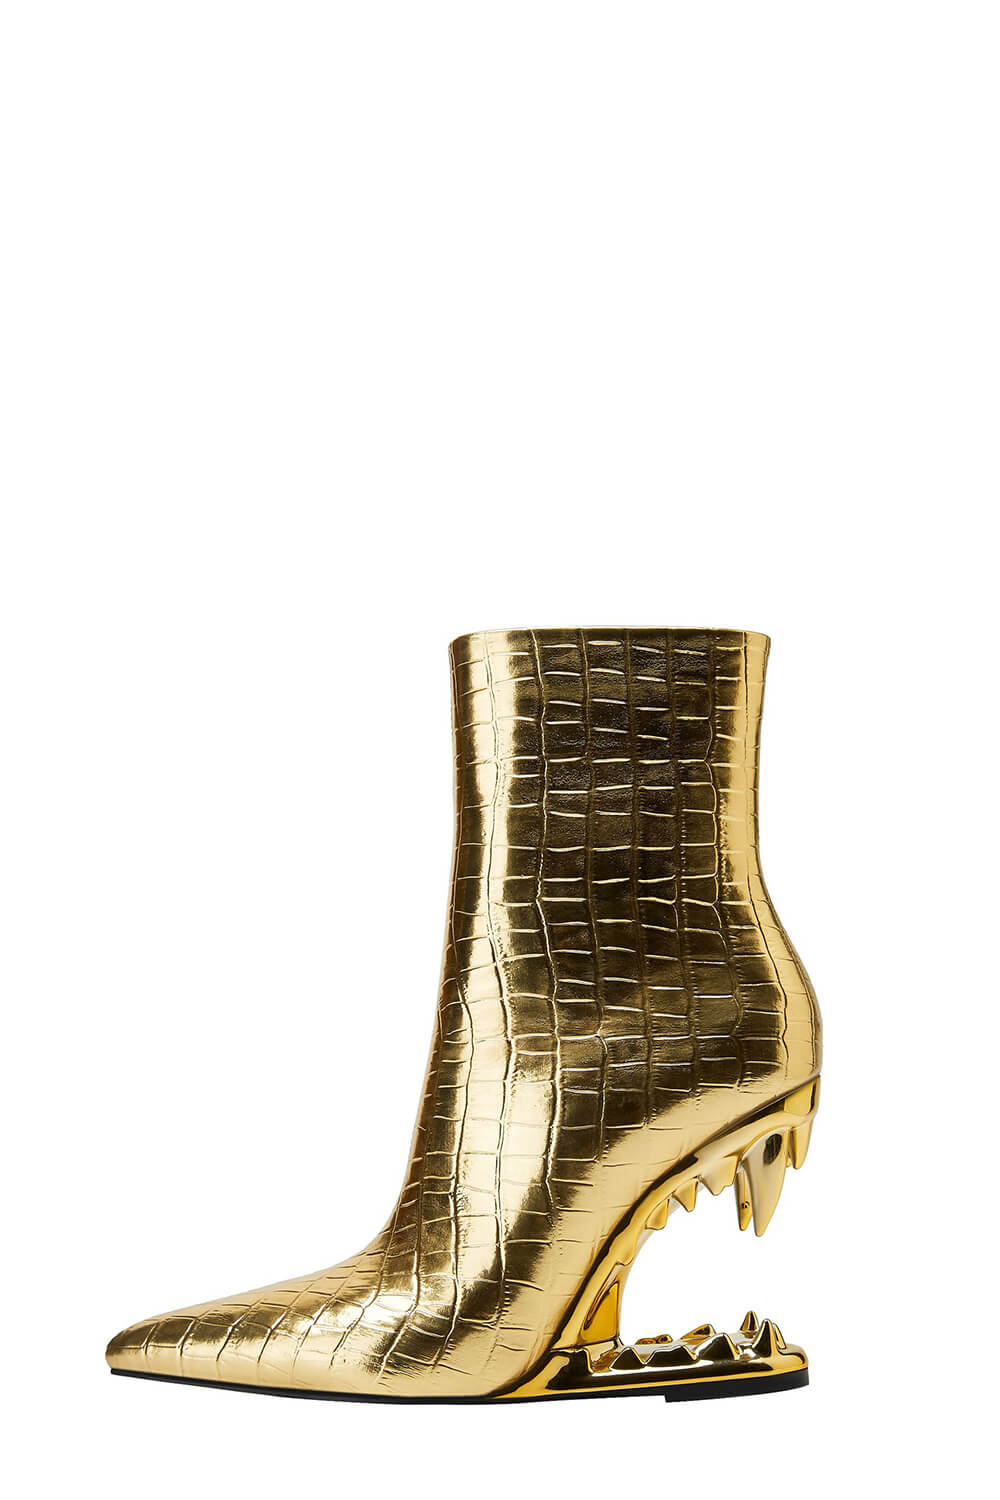 Gold Croc Print Pointed Toe Ankle Morso Heeled Boots